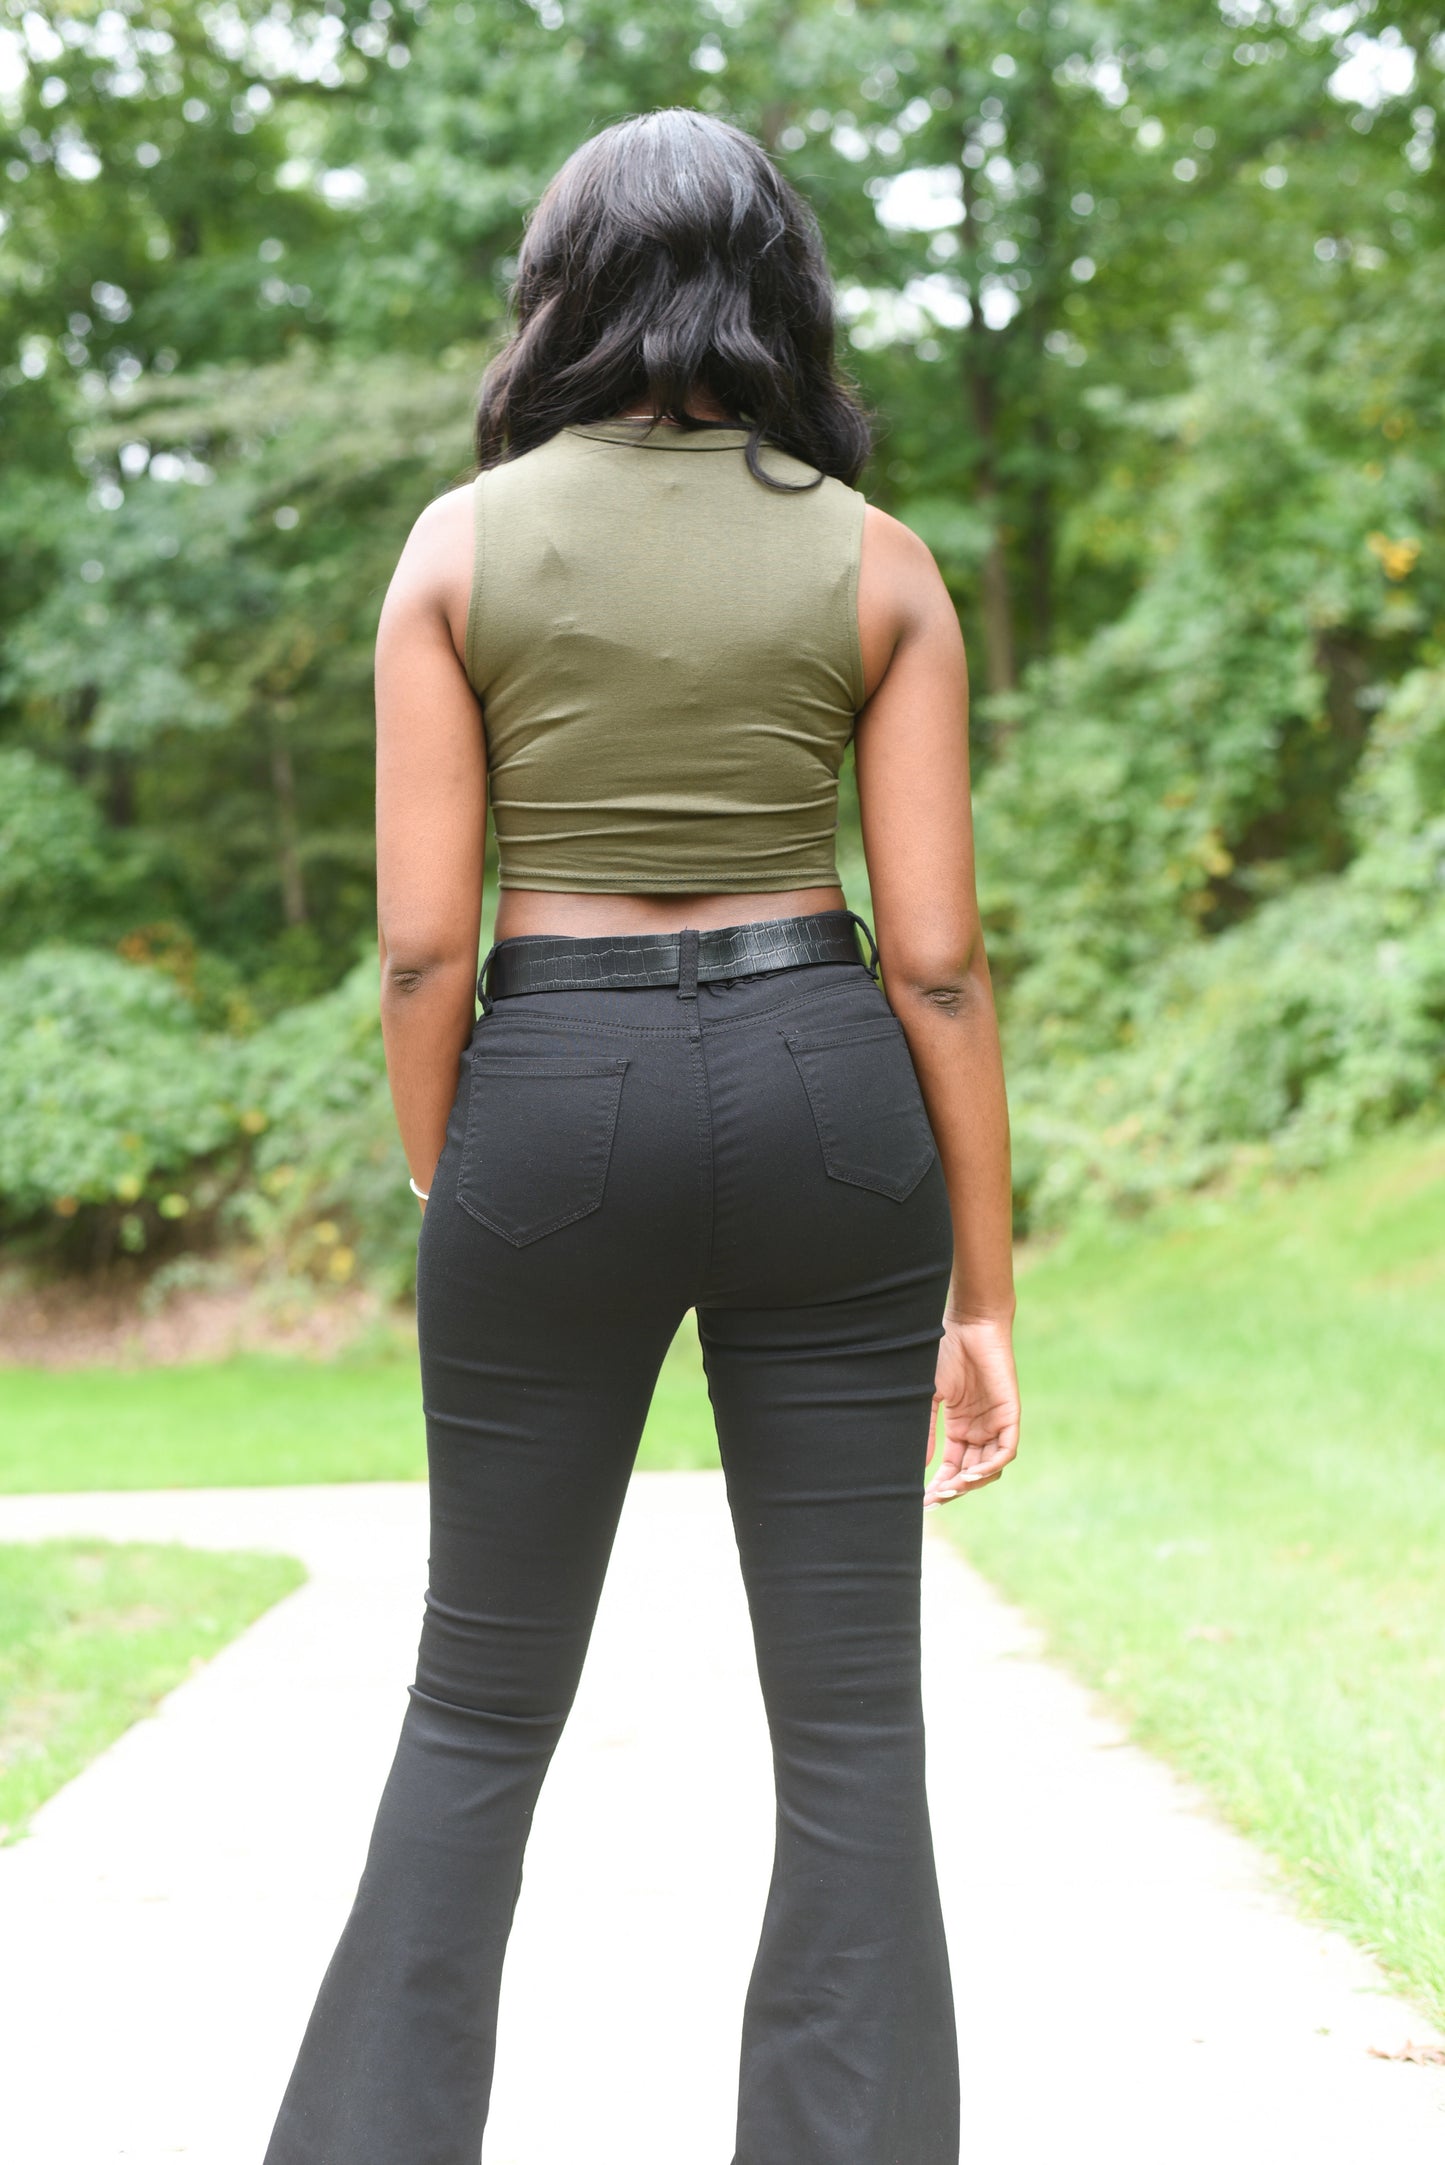 Scrunched Sleeveless Olive Green Crop Top Shirt